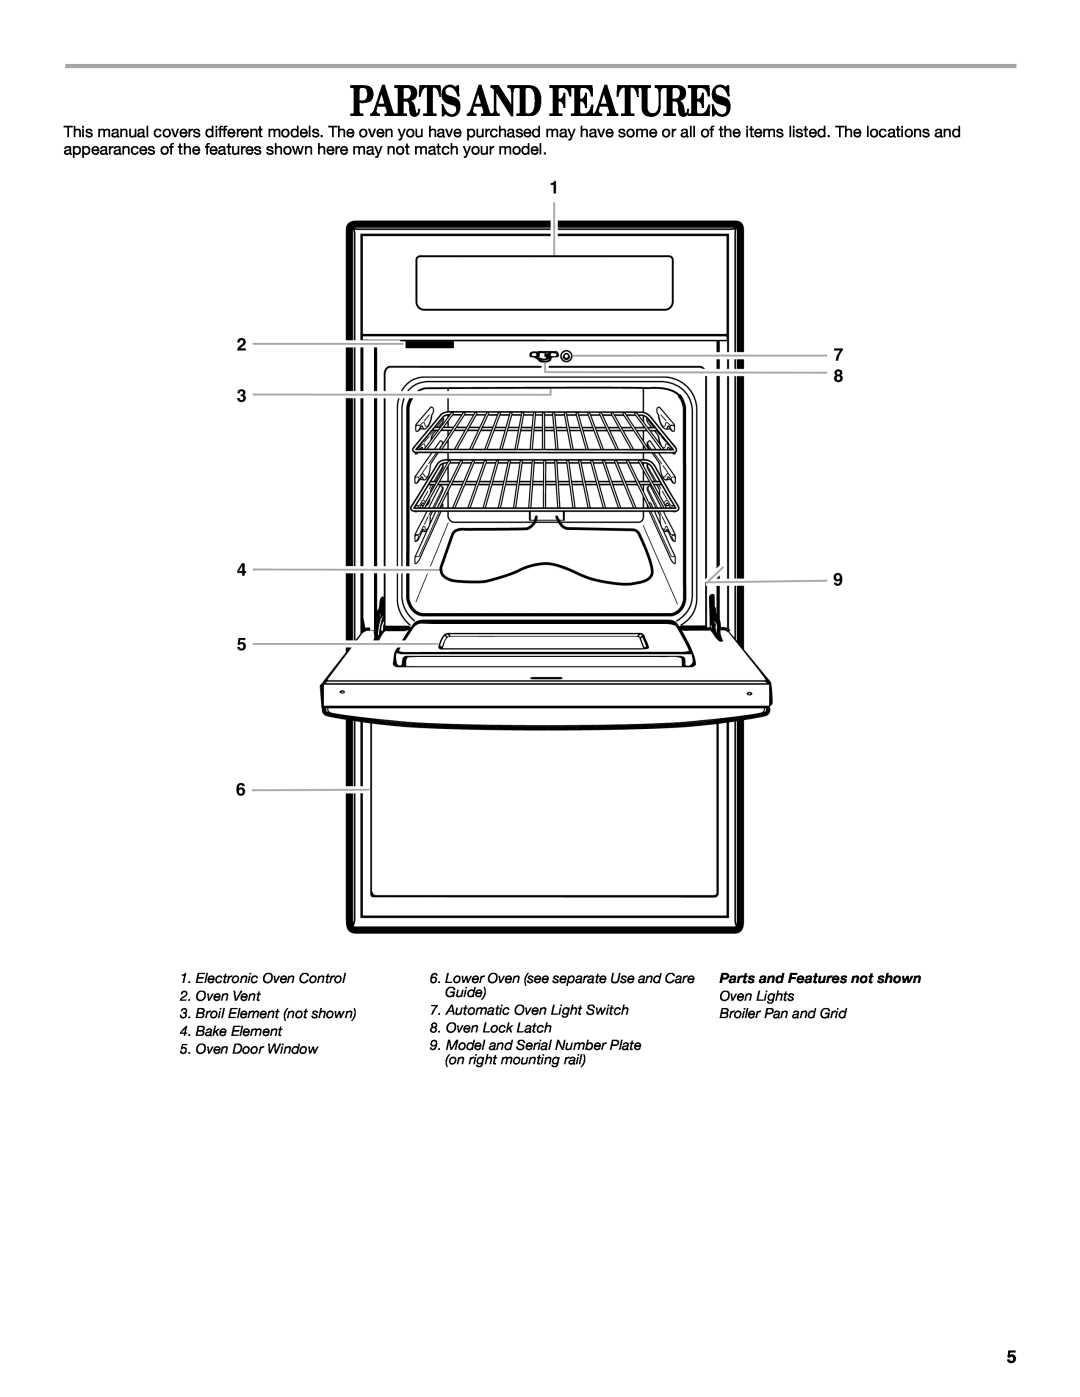 Whirlpool RBD276 manual Parts And Features, Parts and Features not shown 